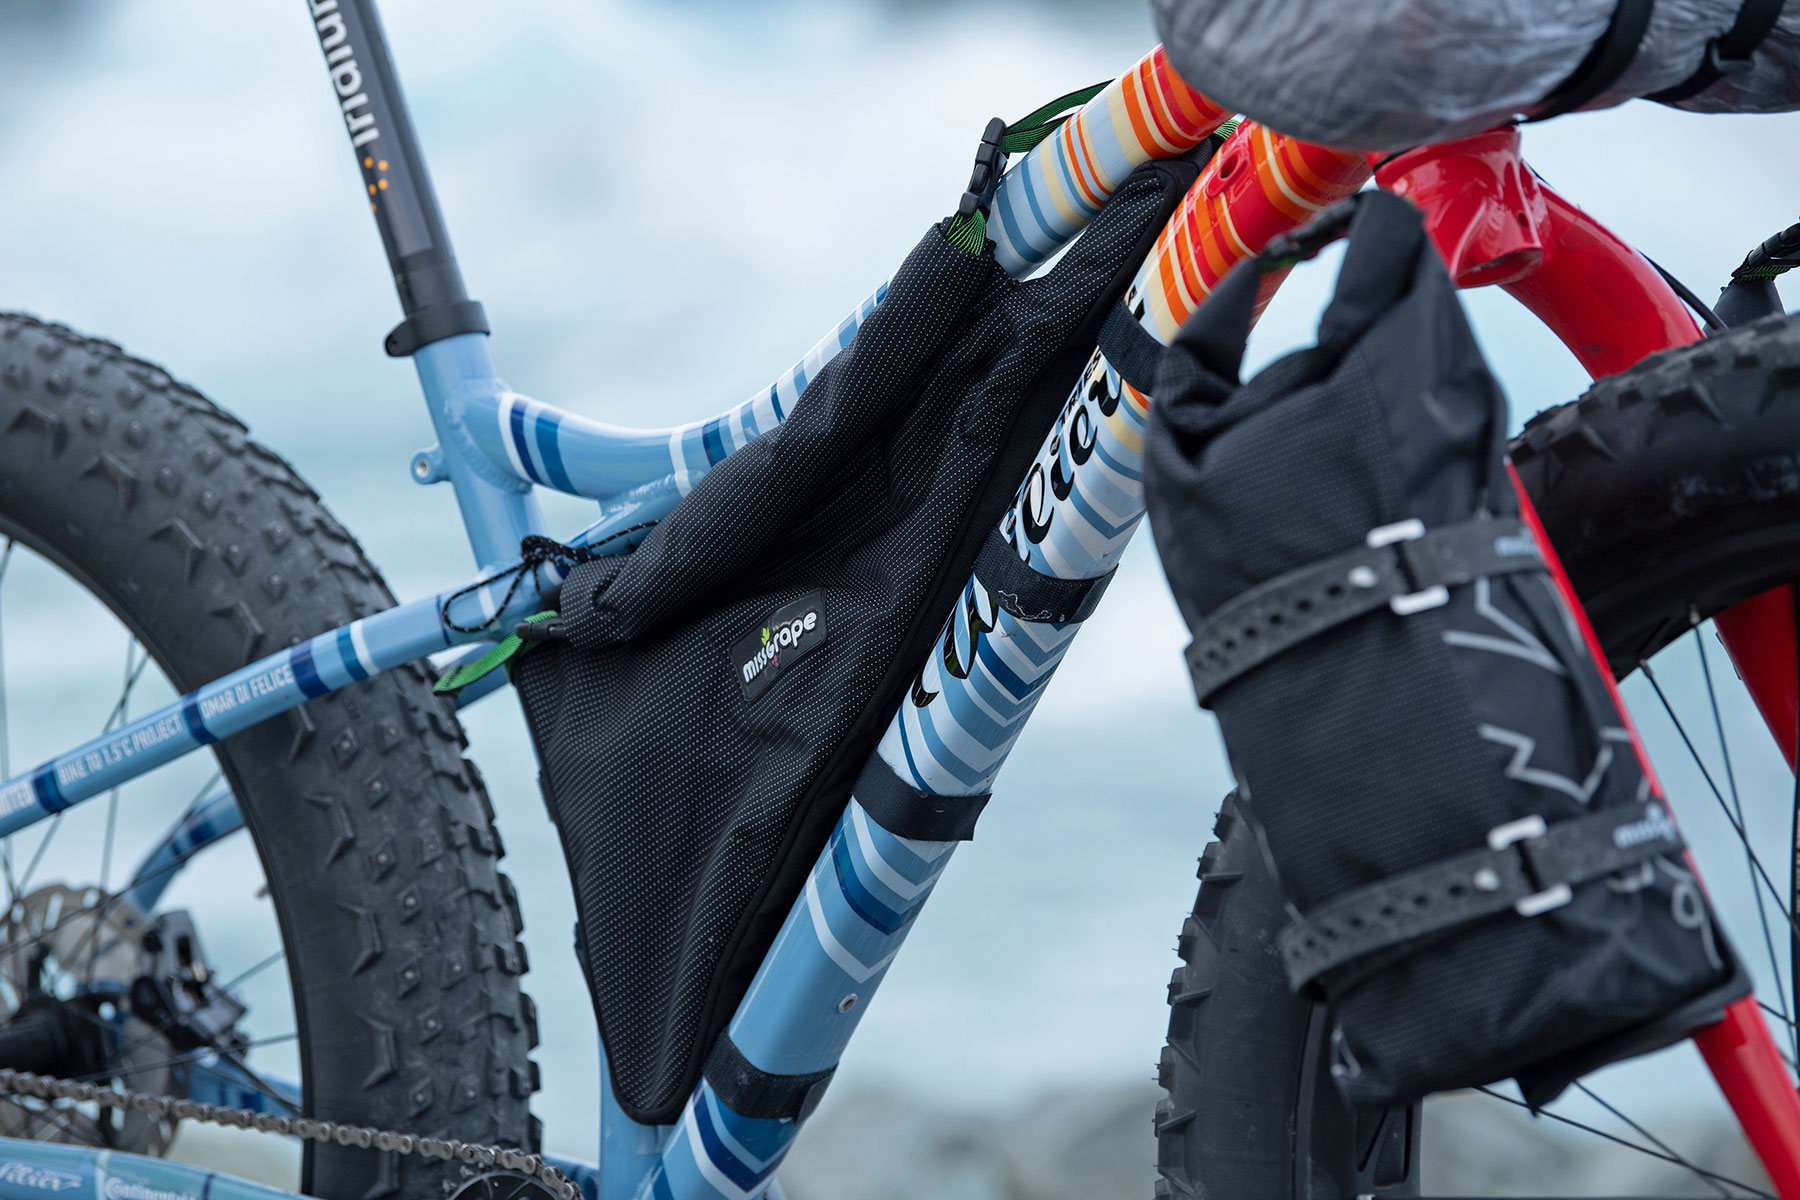 Omar di Felice Antarctica Unlimited solo crossing by fat bike, fatbike expedition for climate change awareness, photo by Mirror Media, frame & Miss Grape bags detail